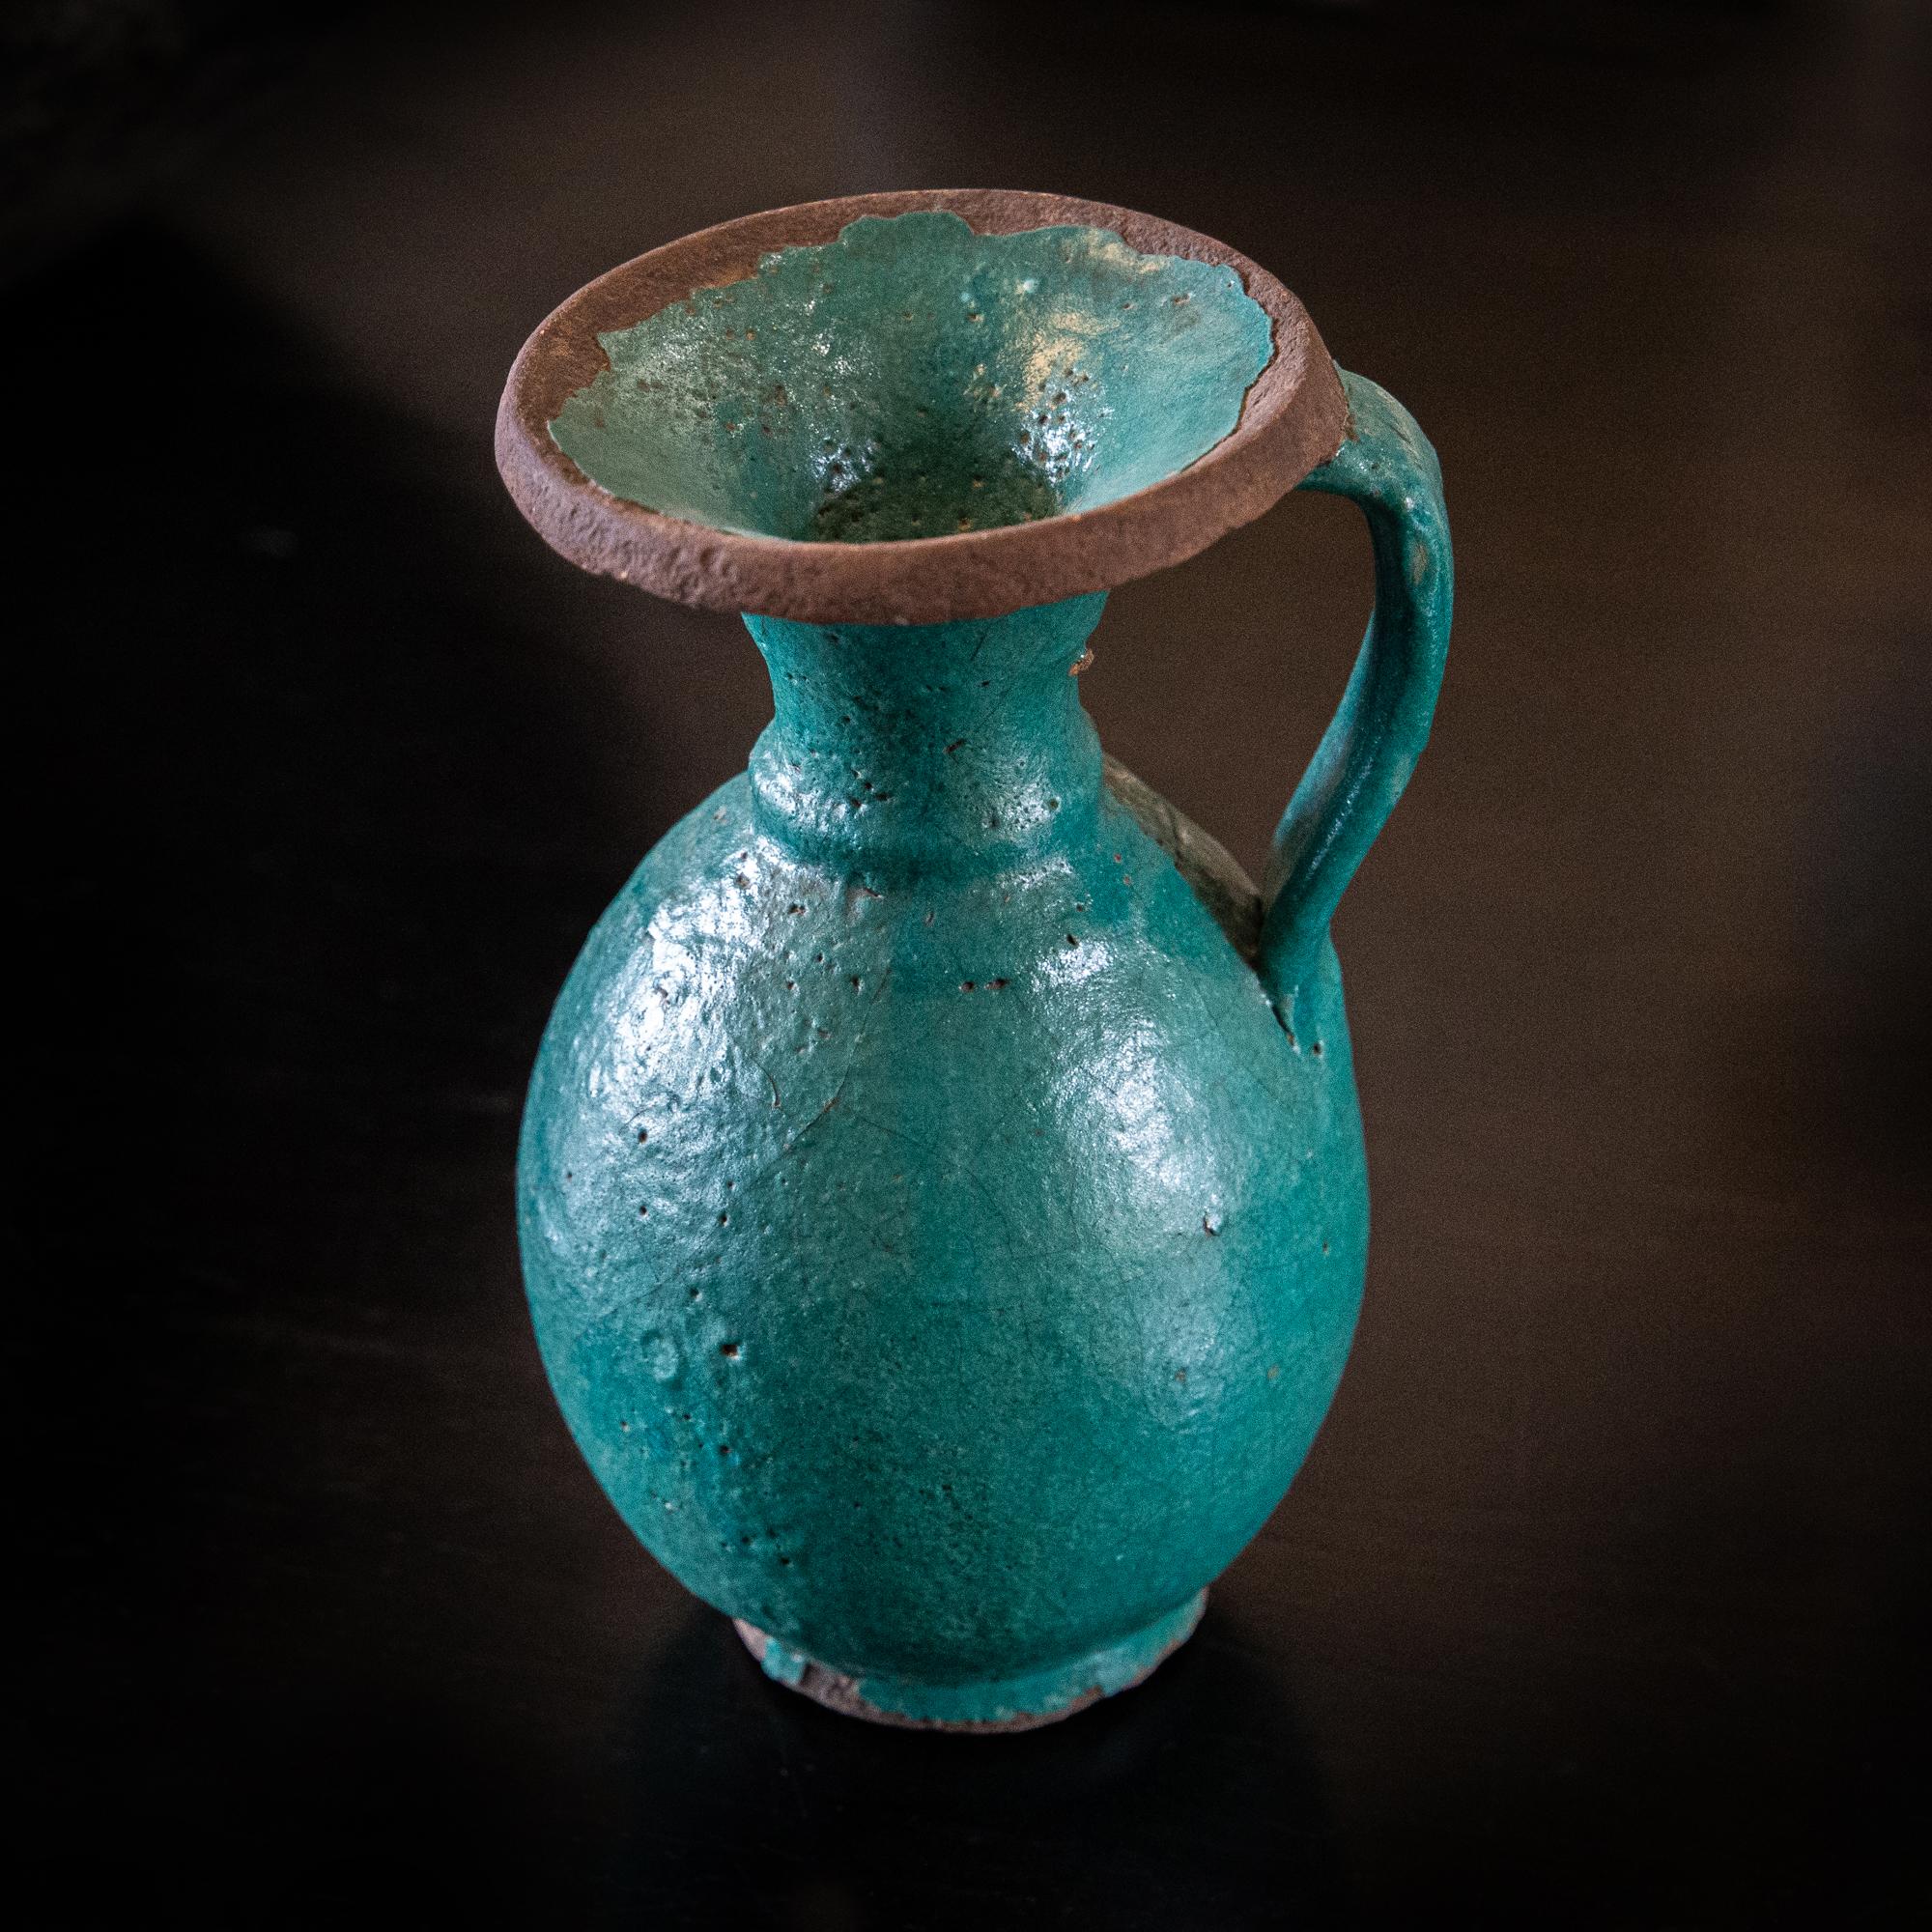 Original Tamegroute eathernware pitcher with vivid iconic deep green glaze specific to this small town on the edge of the Sahara. This version showing the qualities of earlier pieces - the definition and depth of green blue colouration, the